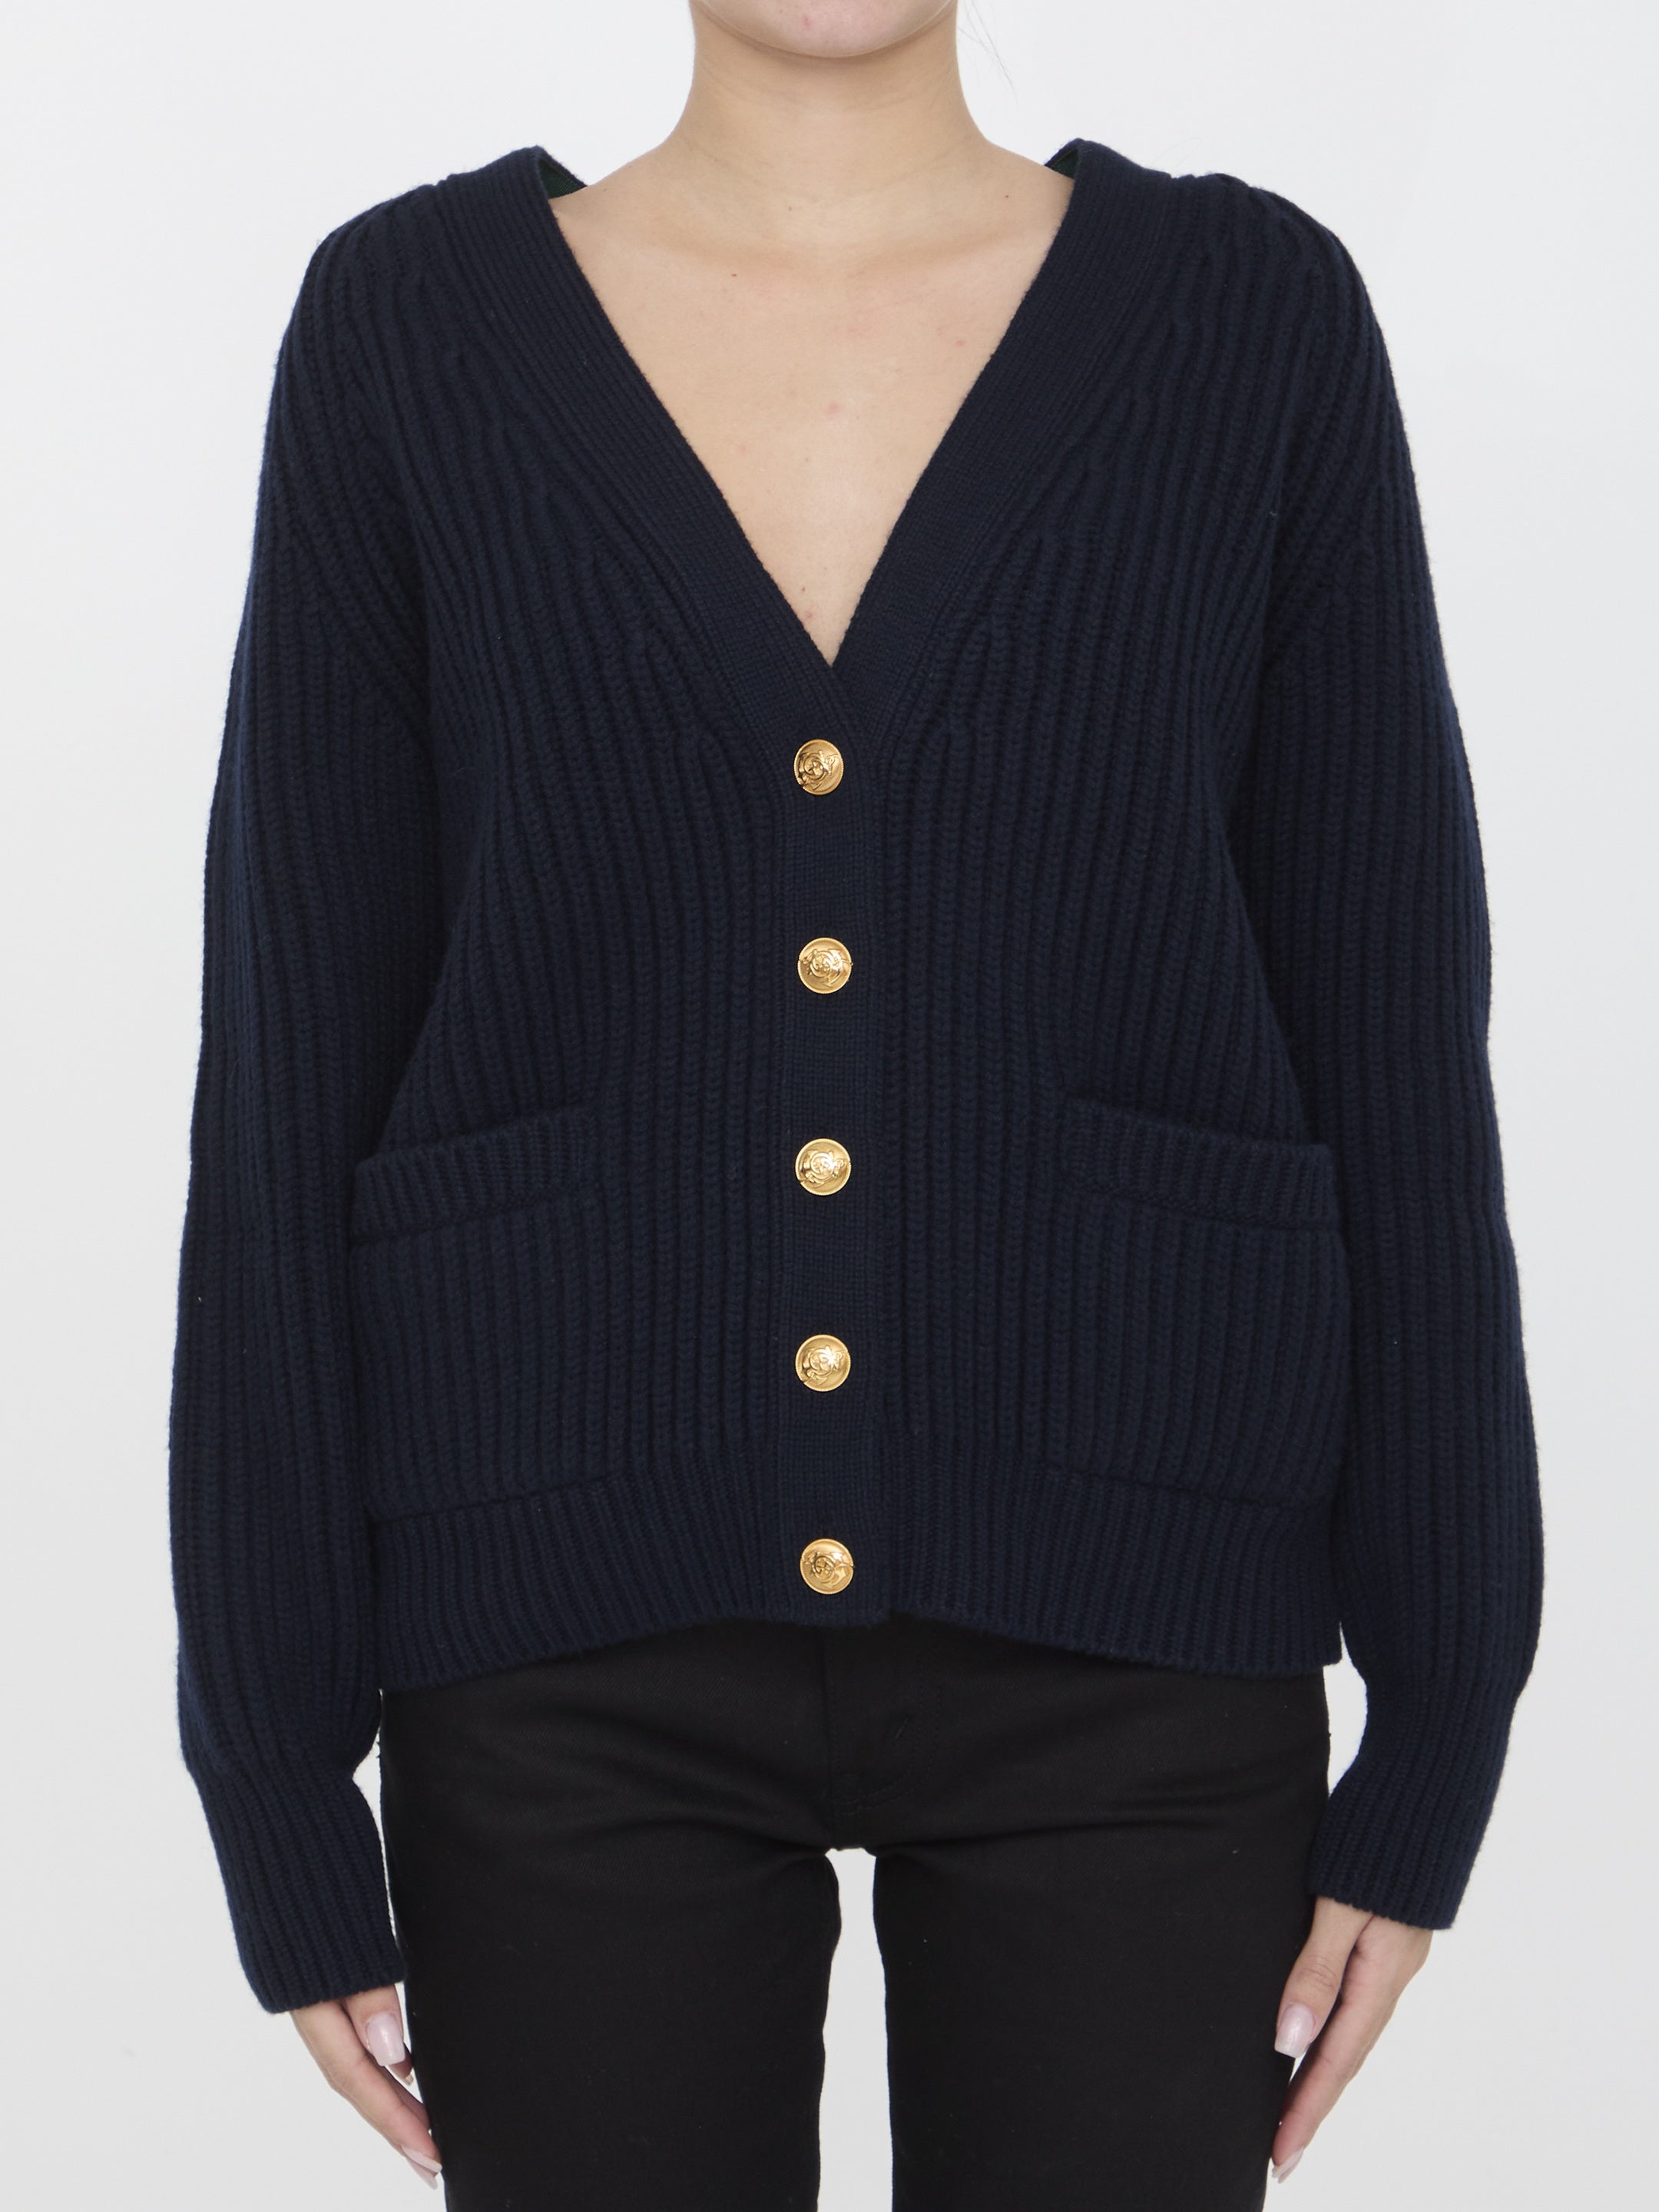 GUCCI-OUTLET-SALE-Ribbed-cardigan-Strick-S-BLUE-ARCHIVE-COLLECTION.jpg